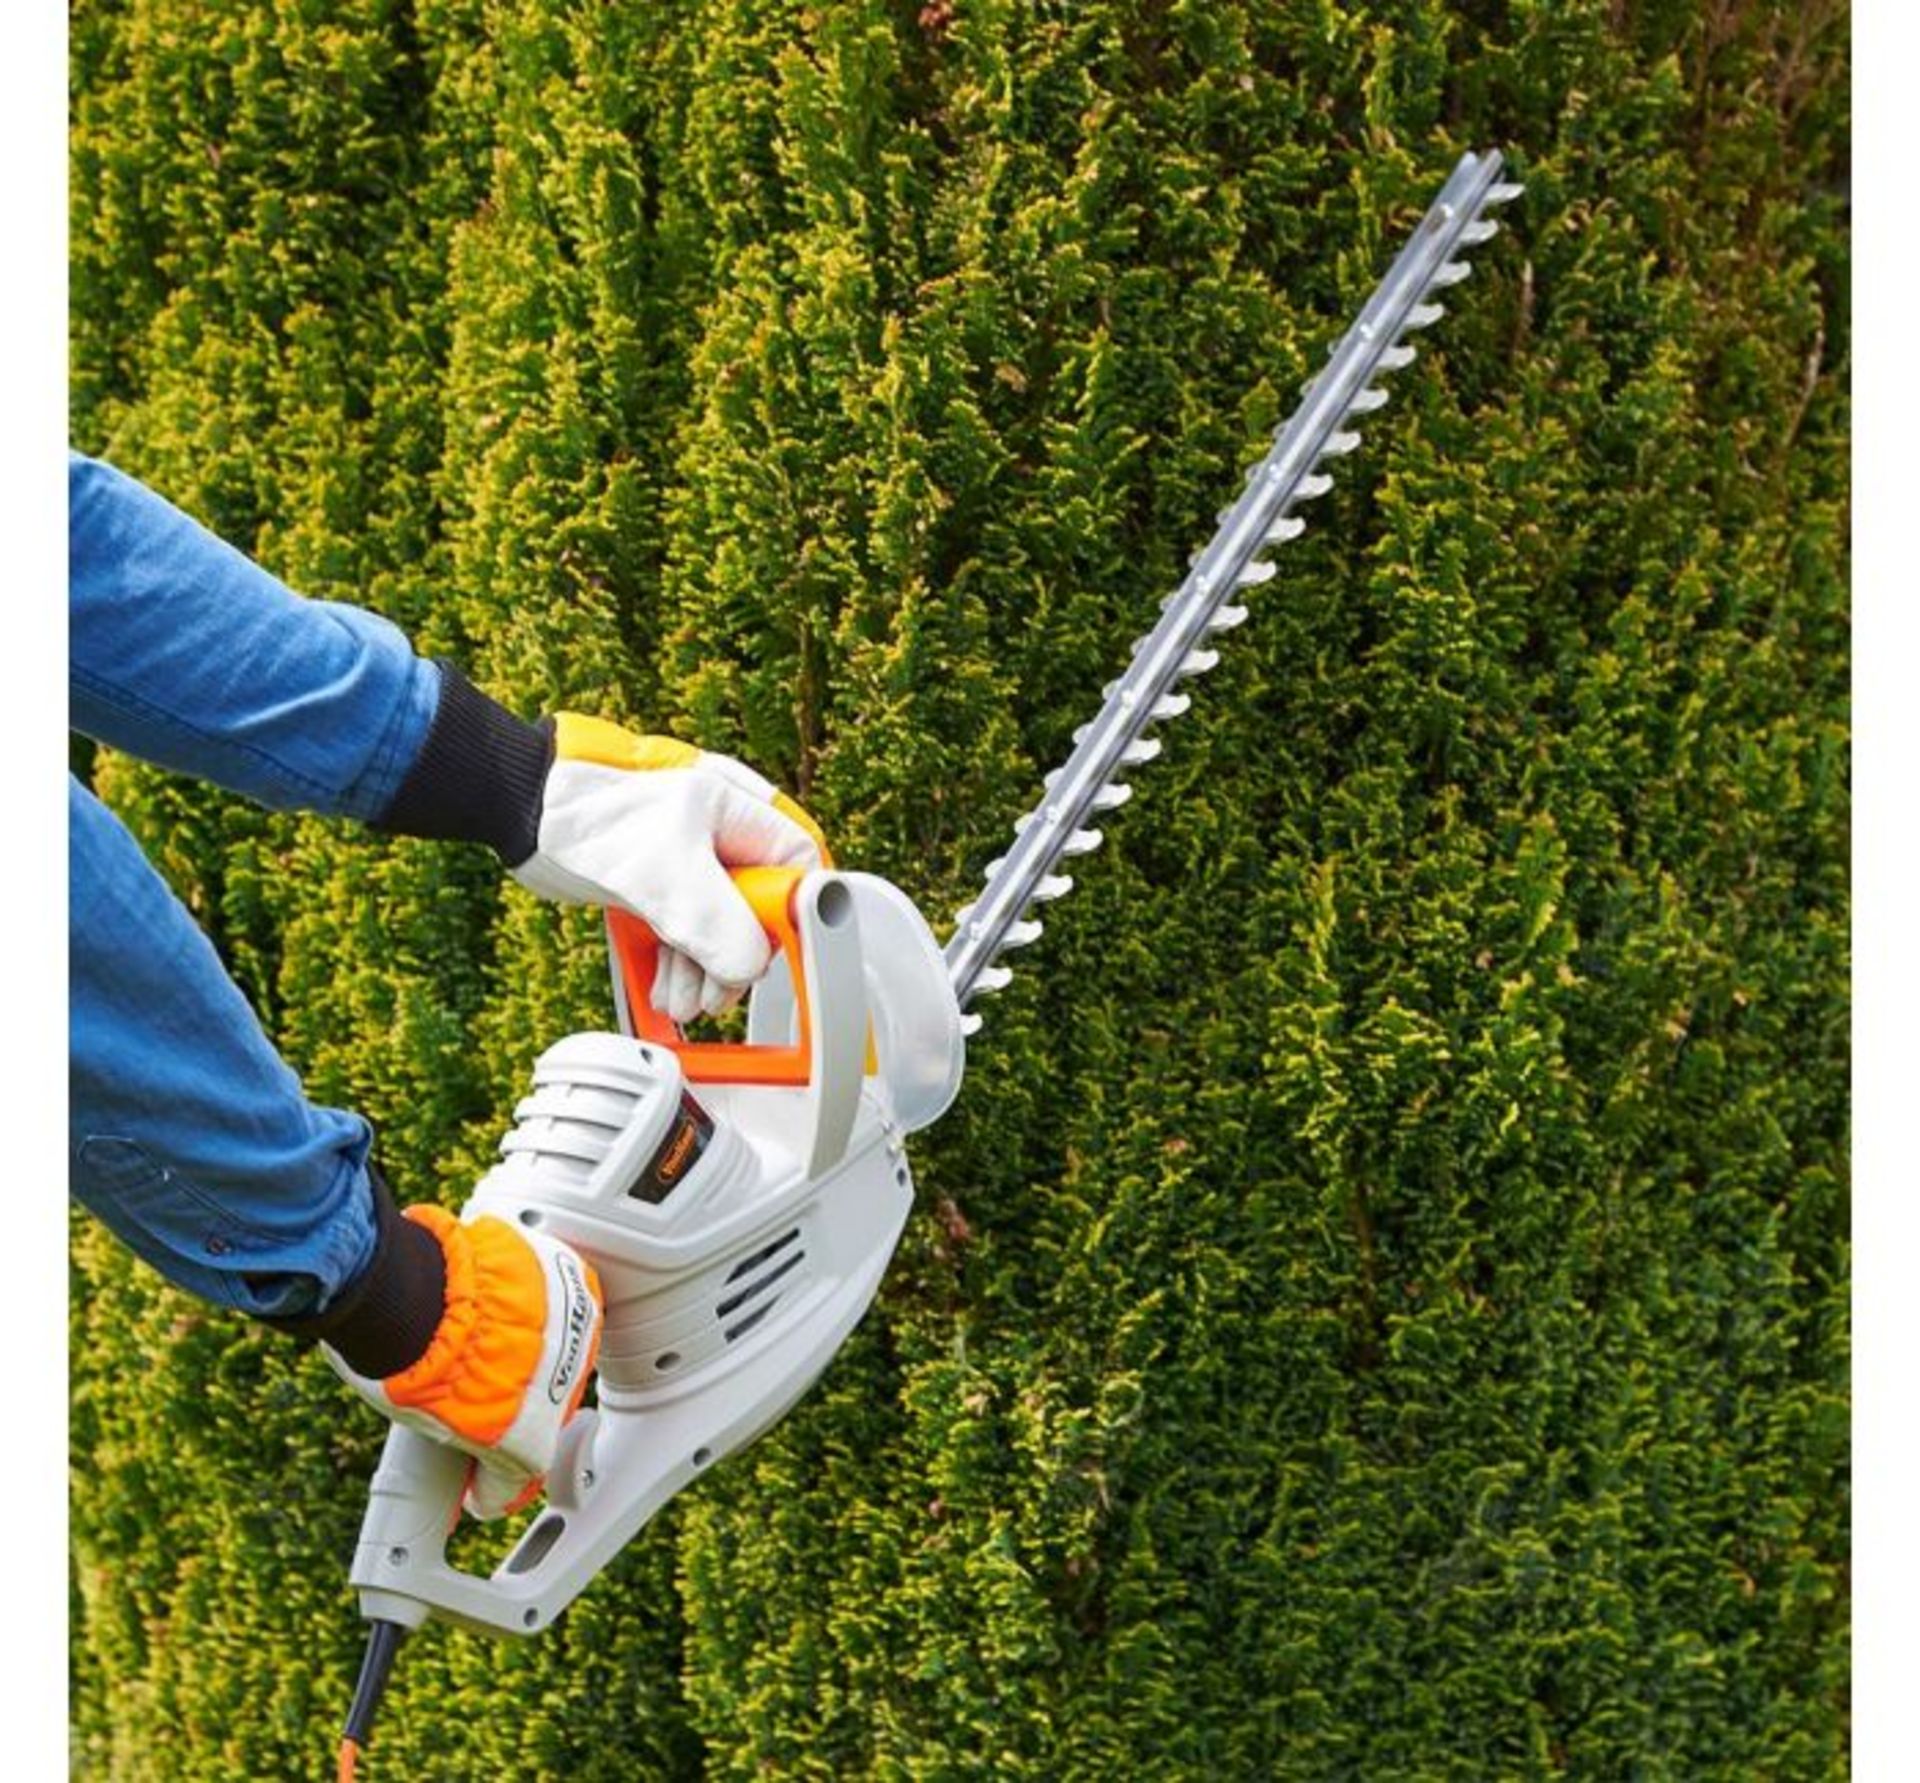 (F57) 550W Hedge Trimmer Lightweight at only 3.2kg with a powerful 550W motor and precision bl...